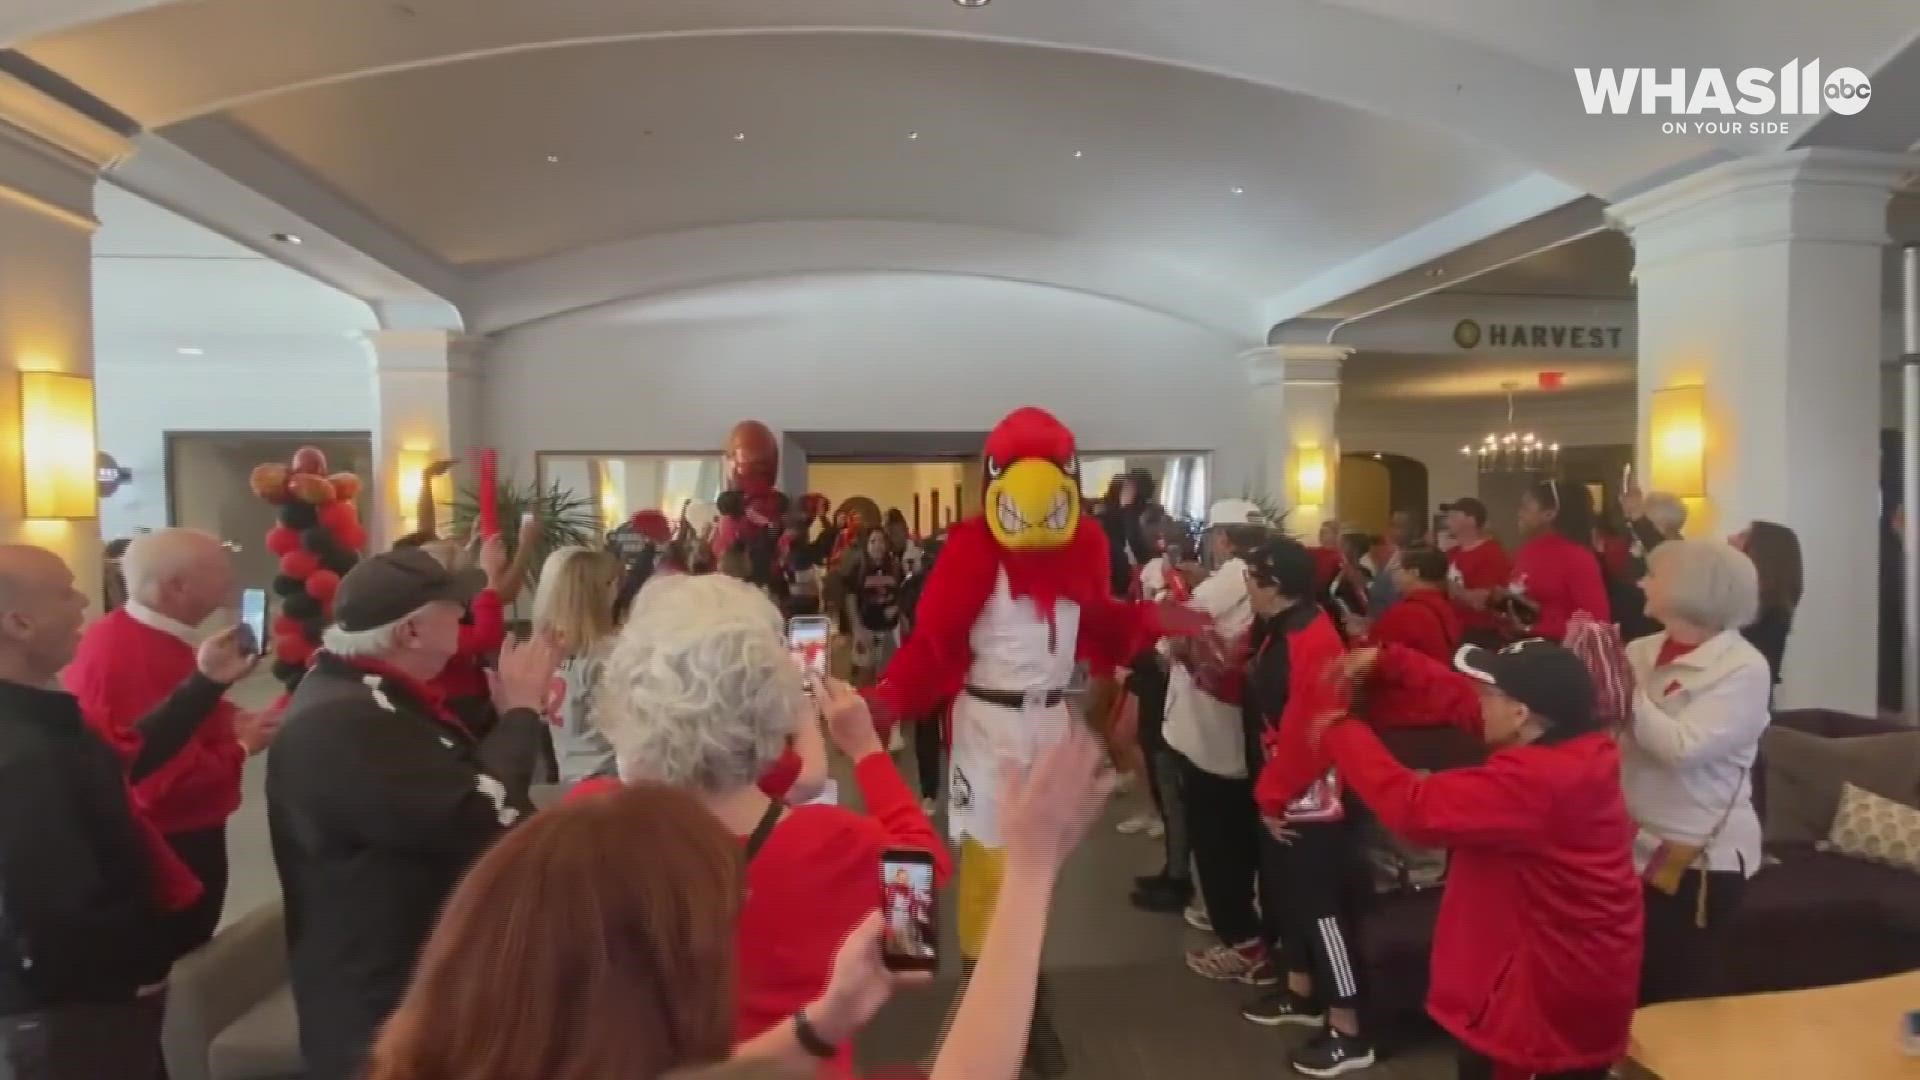 Coach Jeff Walz and members of the Louisville Cardinals basketball team receive a loud, cheerful send-off from fans before their Elite 8 match against Michigan.